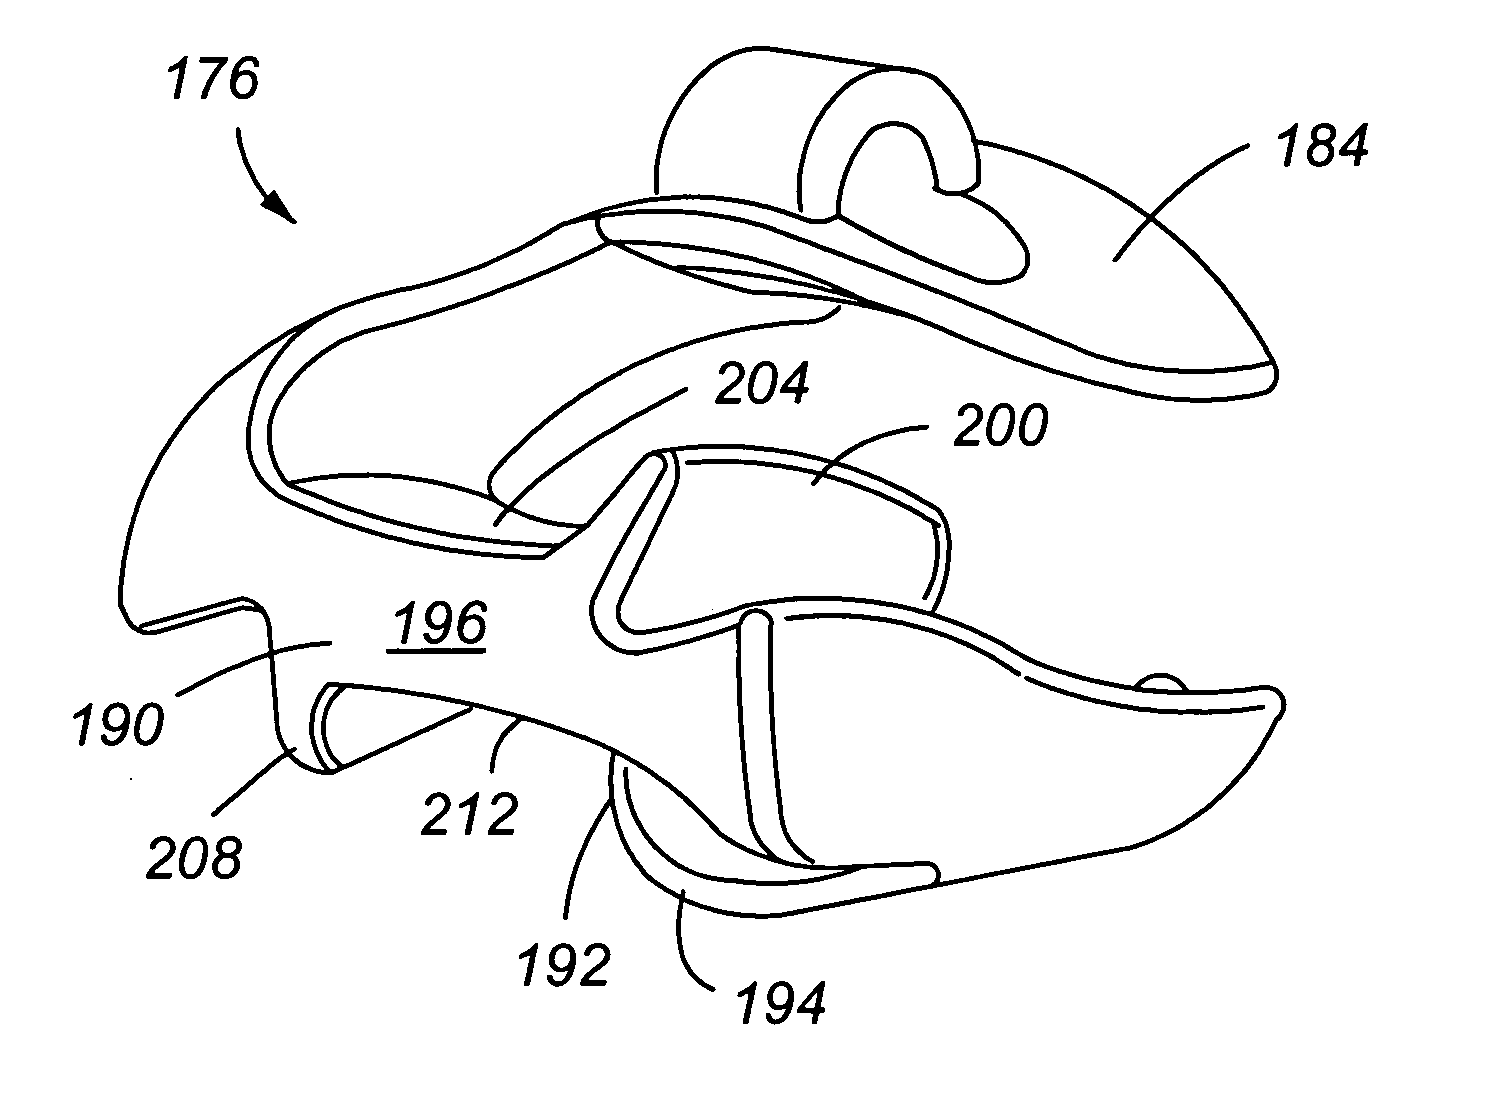 Device for creating a seal between fabrics or other materials